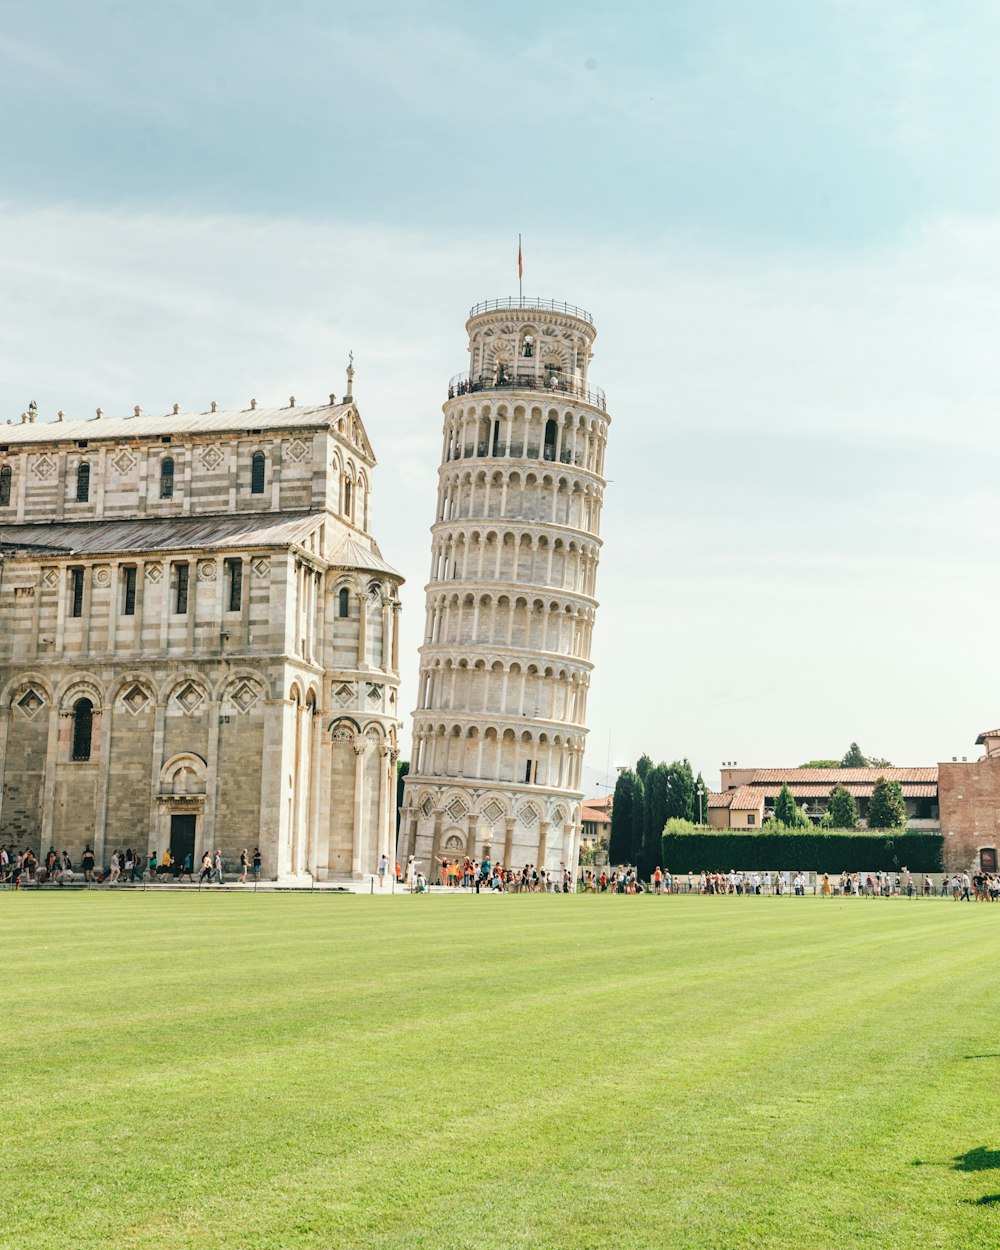 Leaning Tower of Pisa at daytime